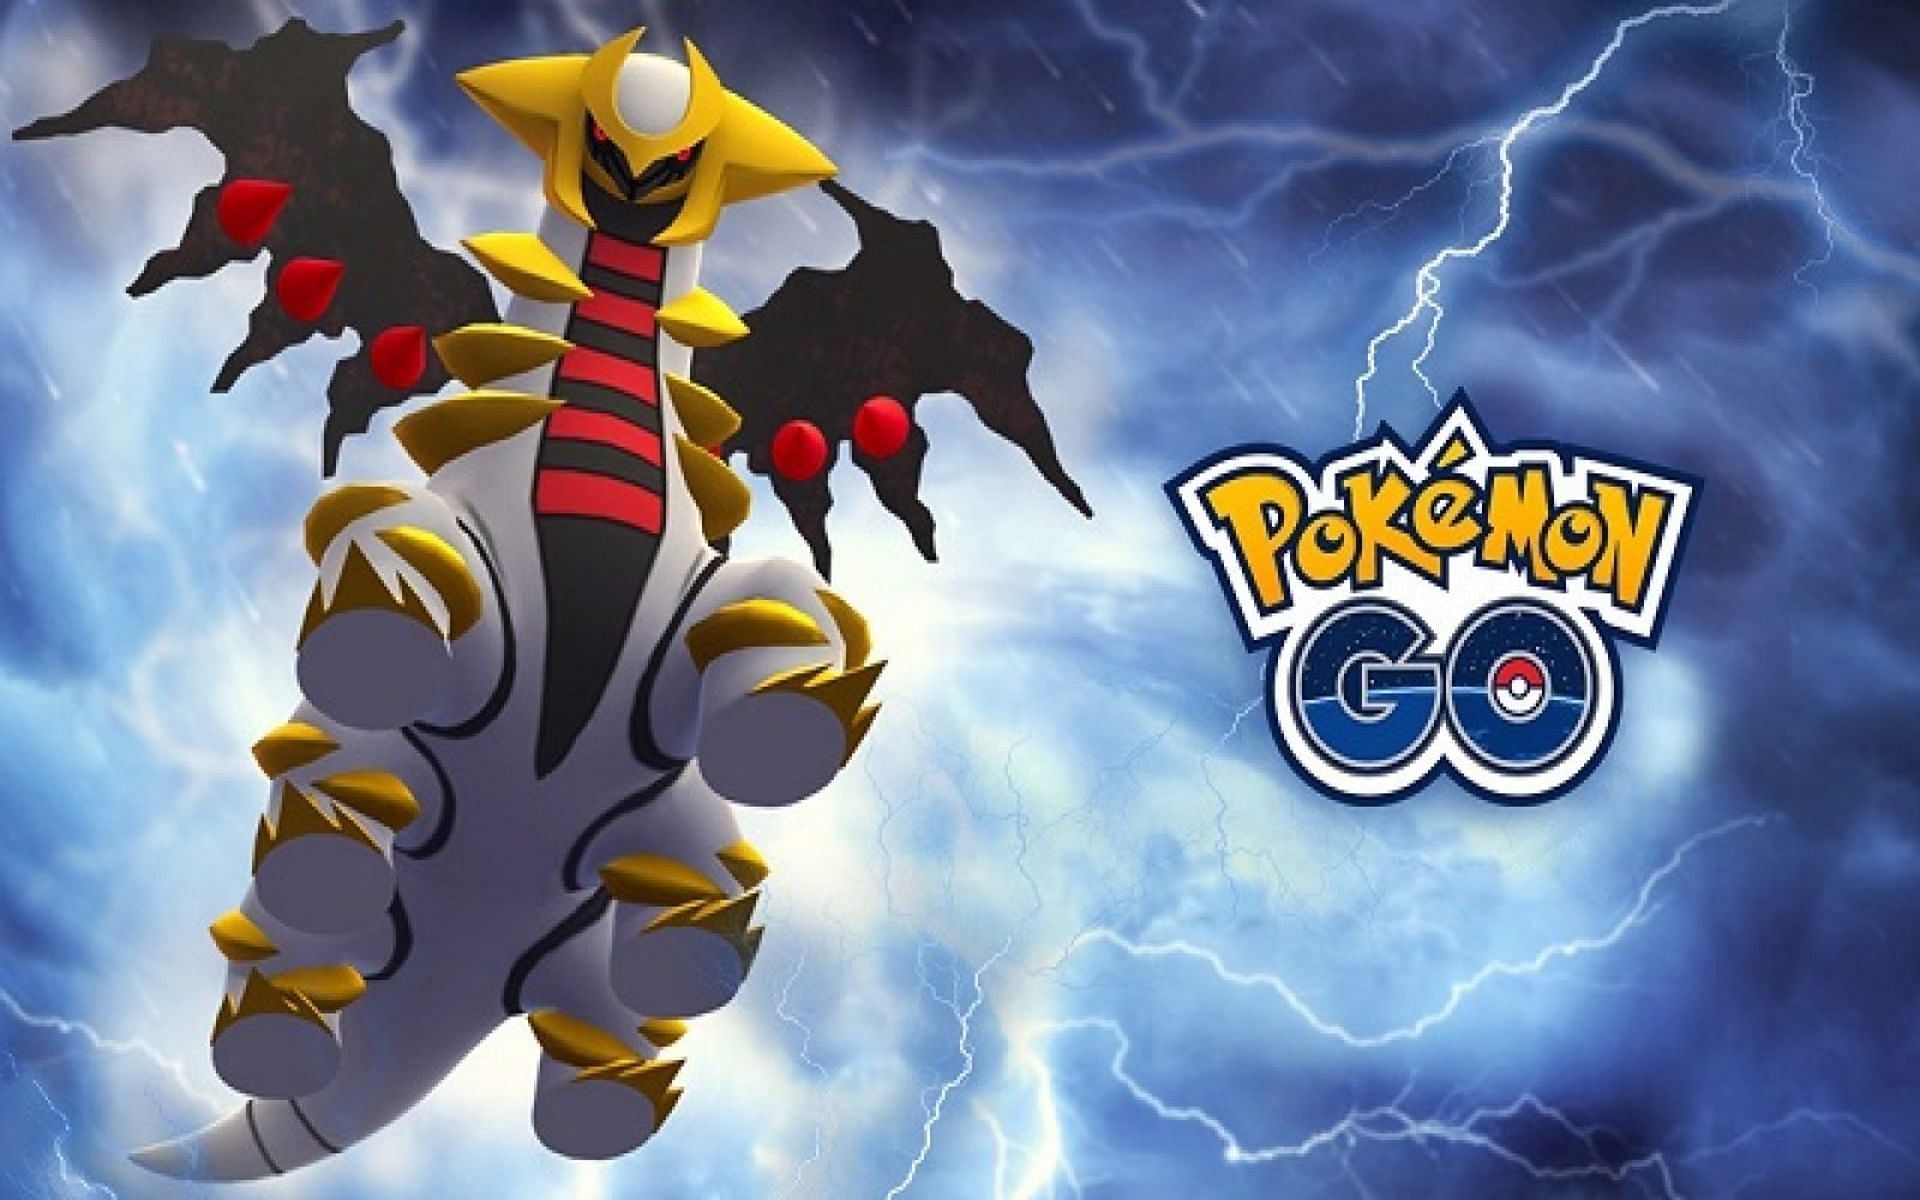 Giratina Altered is currently a Tier 5 Raid boss (Image via Niantic)